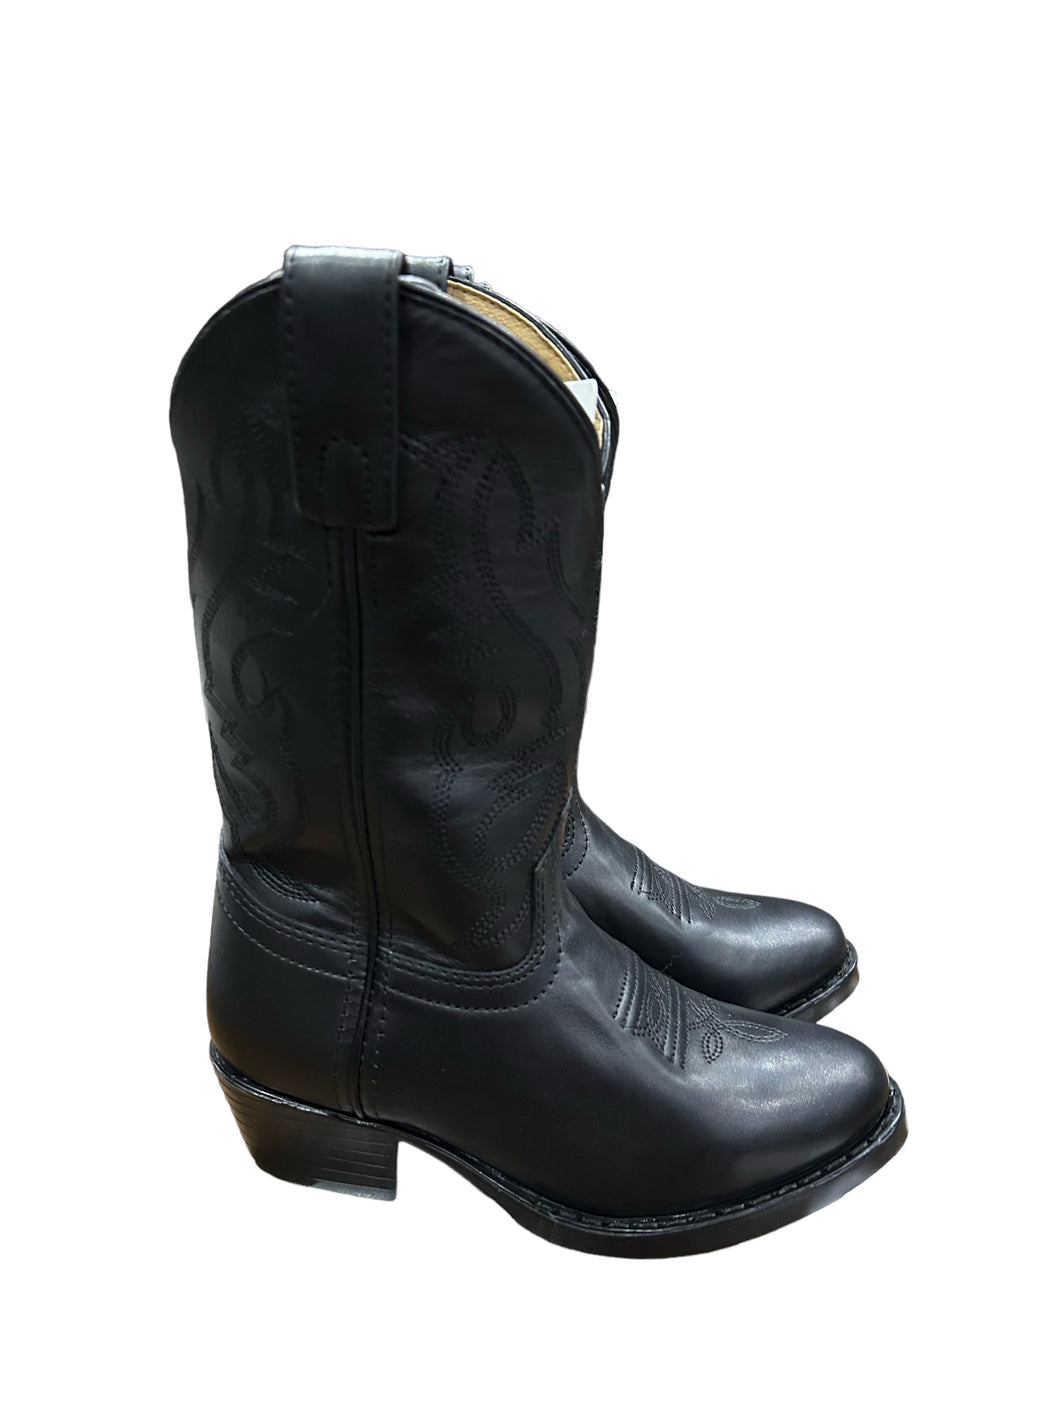 Smoky Mountain Boots 3032Y Denver Black Western Youth Boots